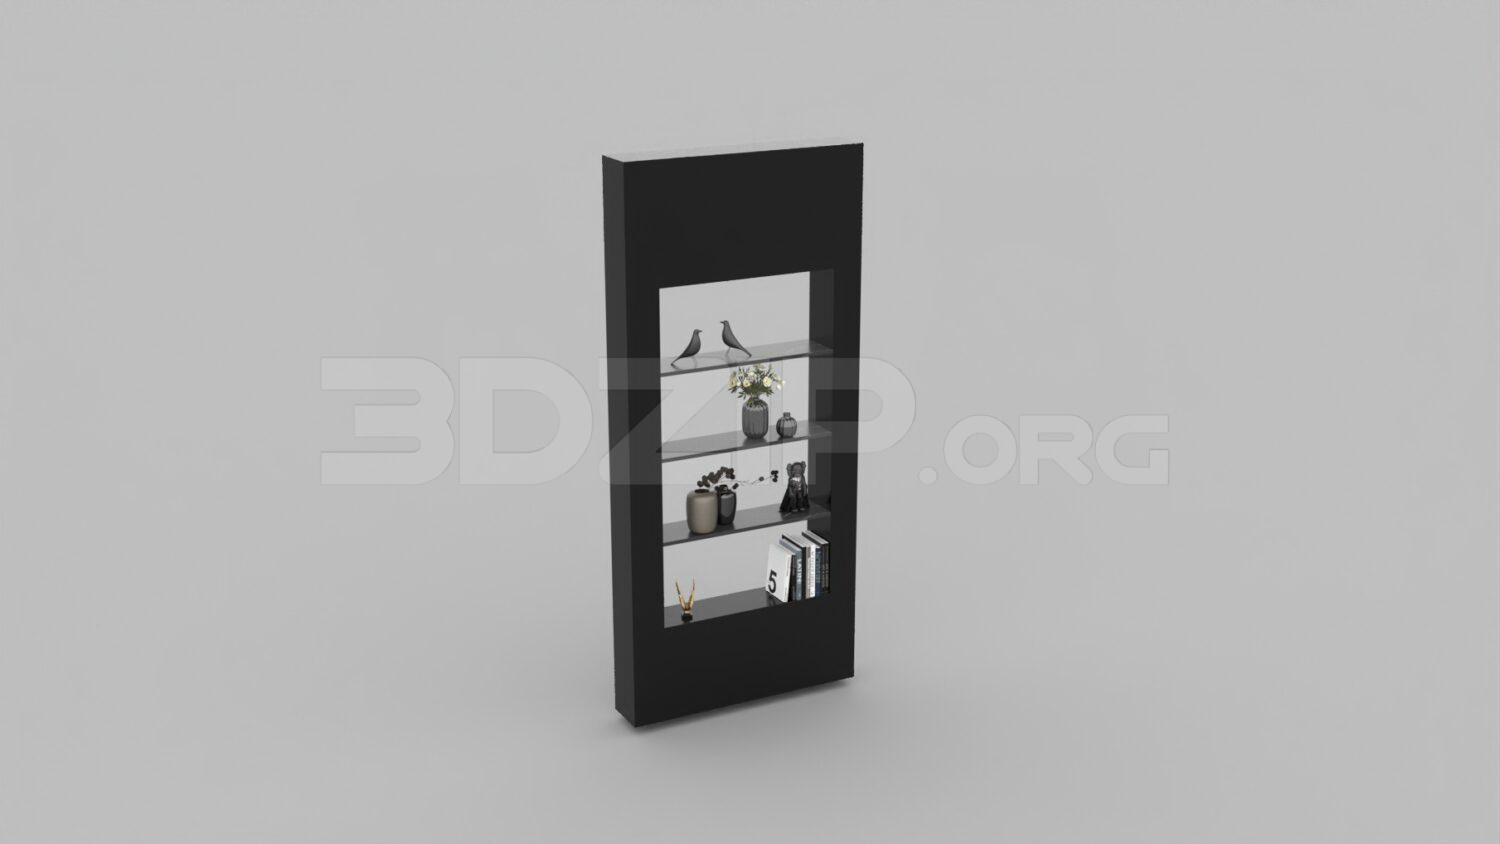 2498. Download Free Display Cabinets Model By Tran Trung Hieu